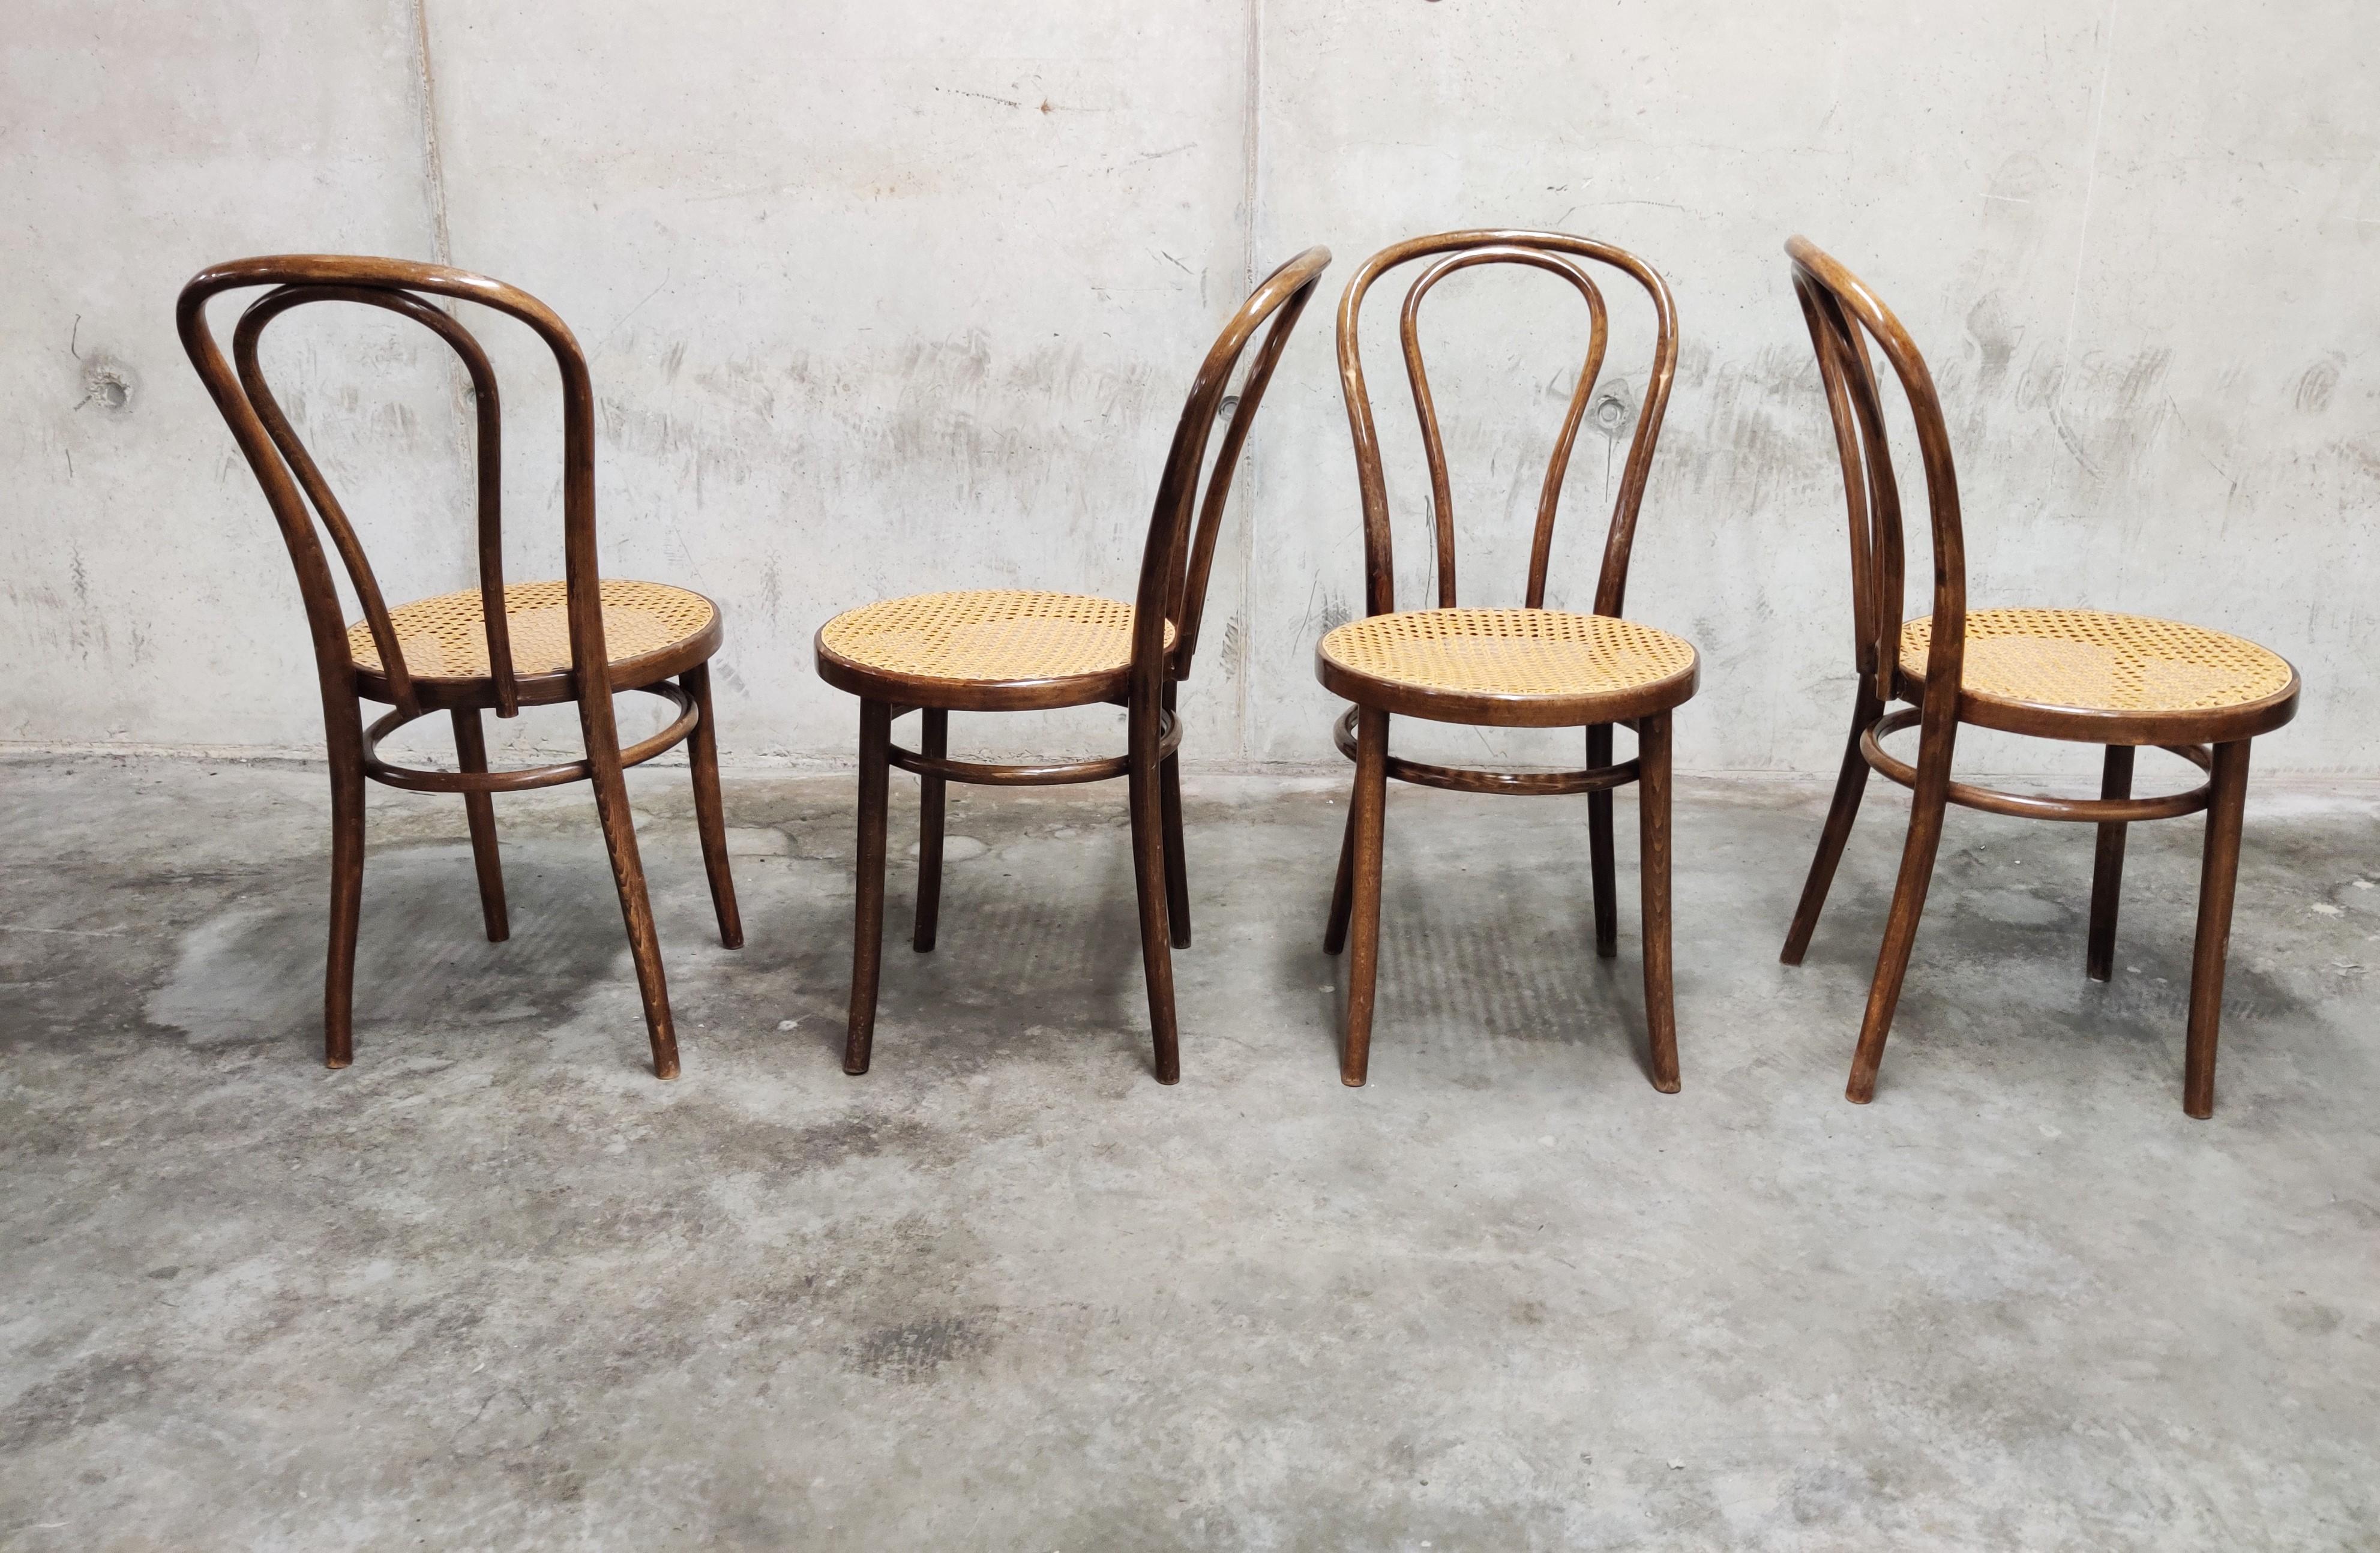 Set of 4 brown Thonet no. 18 dining chairs by ZPM Radomsko.

The cane seats are in good condition.

1950s - Poland

Dimensions:
Height 90cm/35